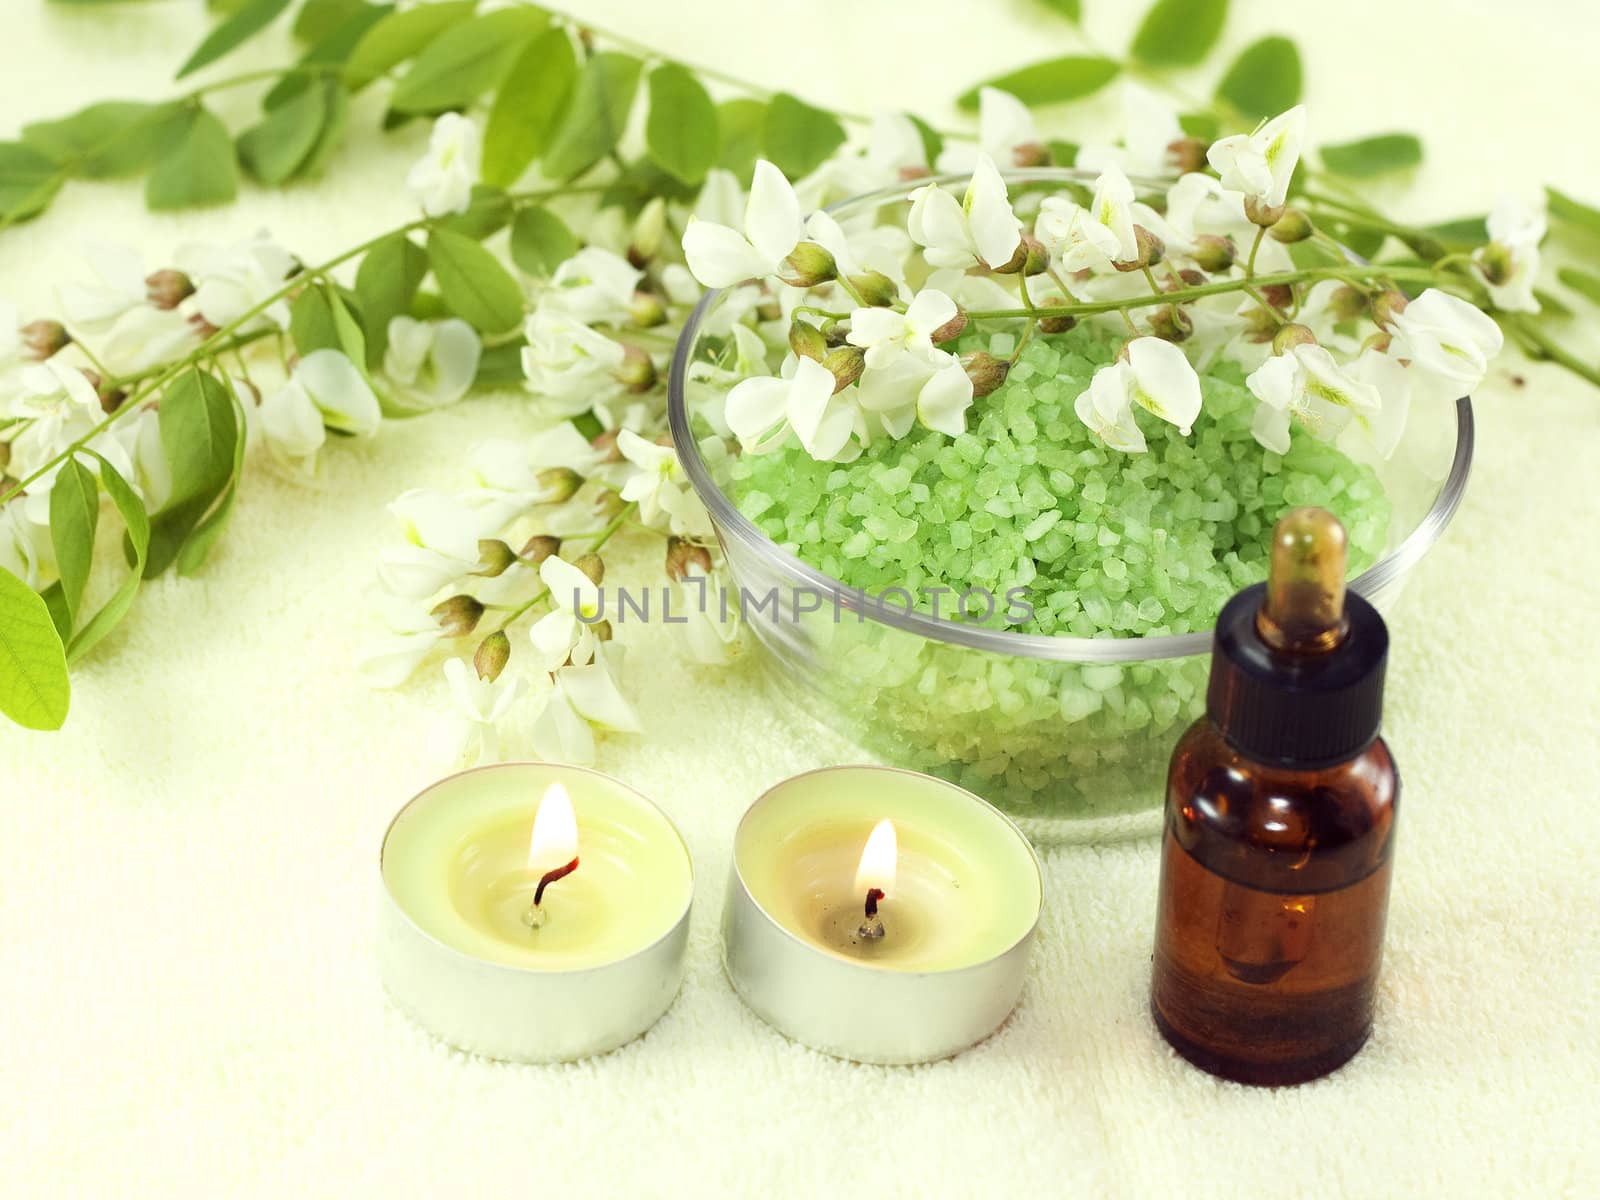 Fragrant flowers, acacia essential oils and candles on a yellow background
